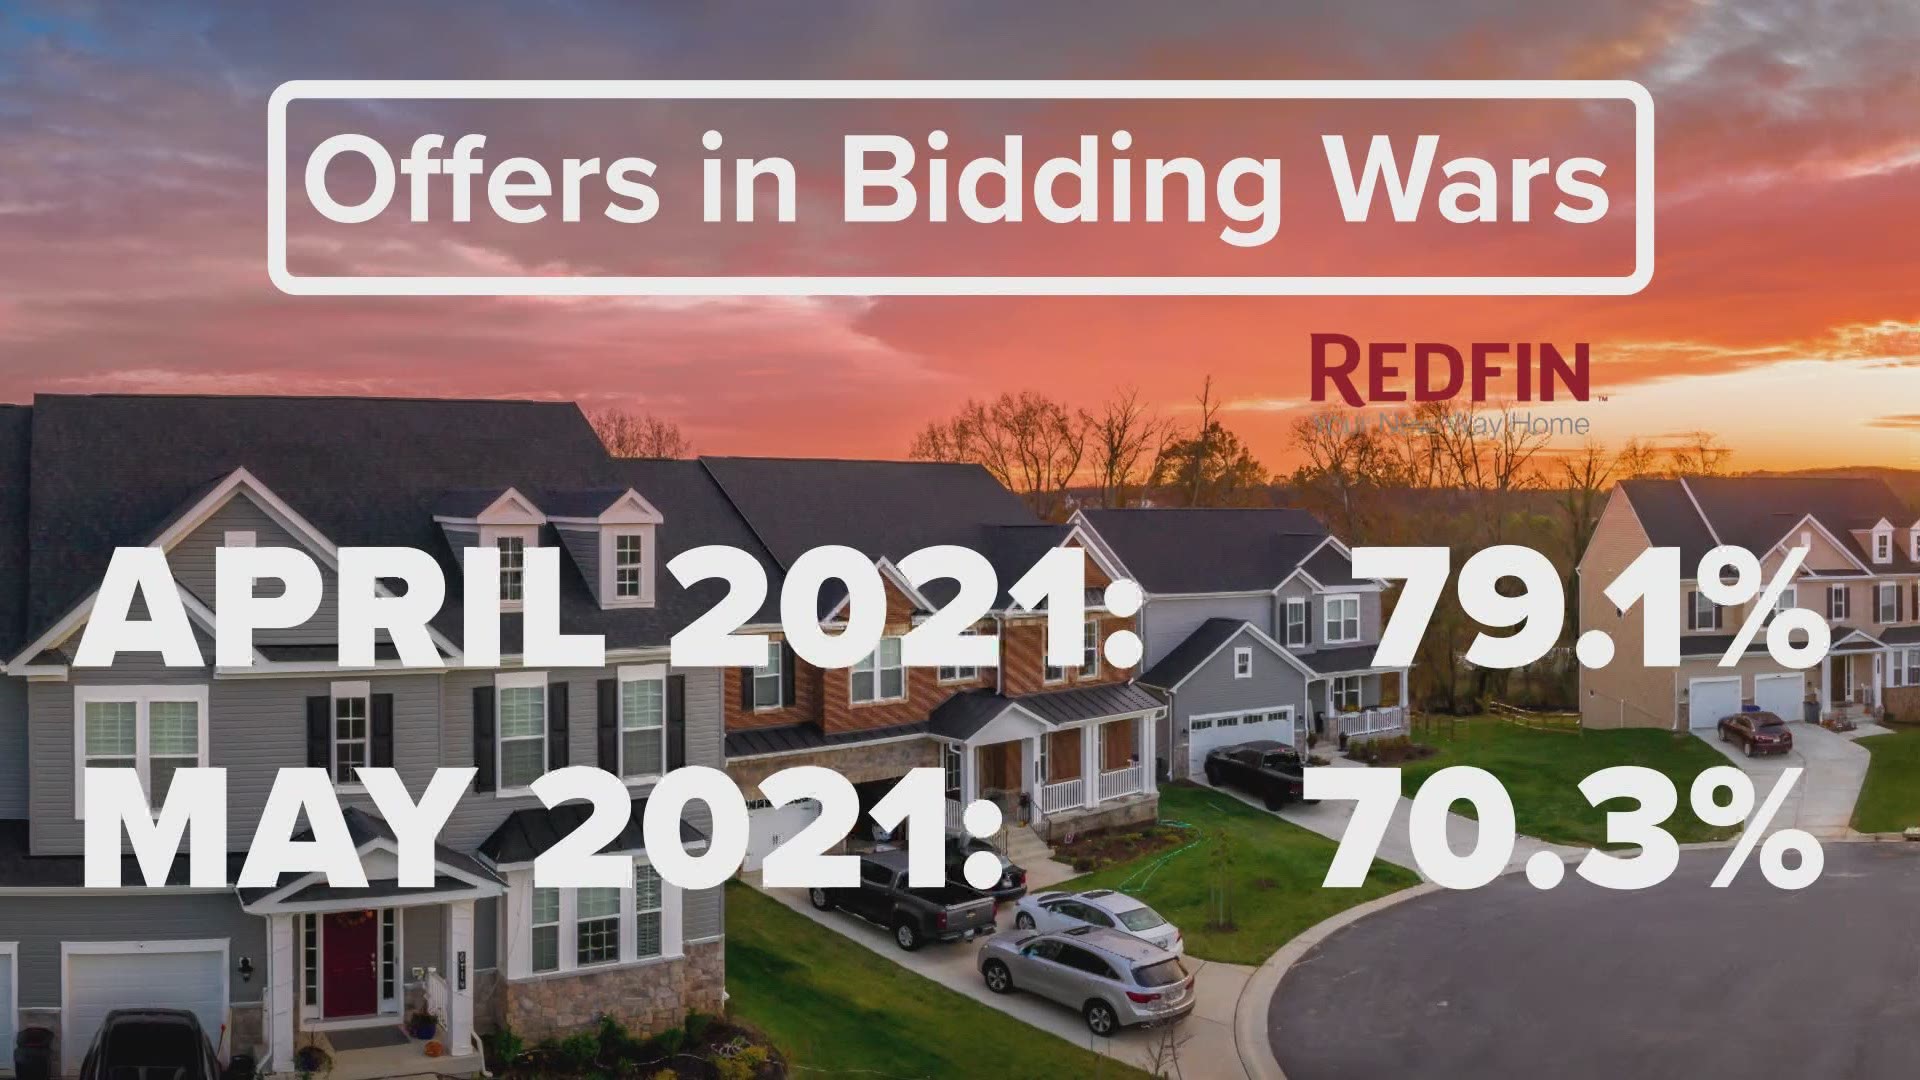 Still, Redfin says expect competing bids in about 7 out of 10 D-FW offers.